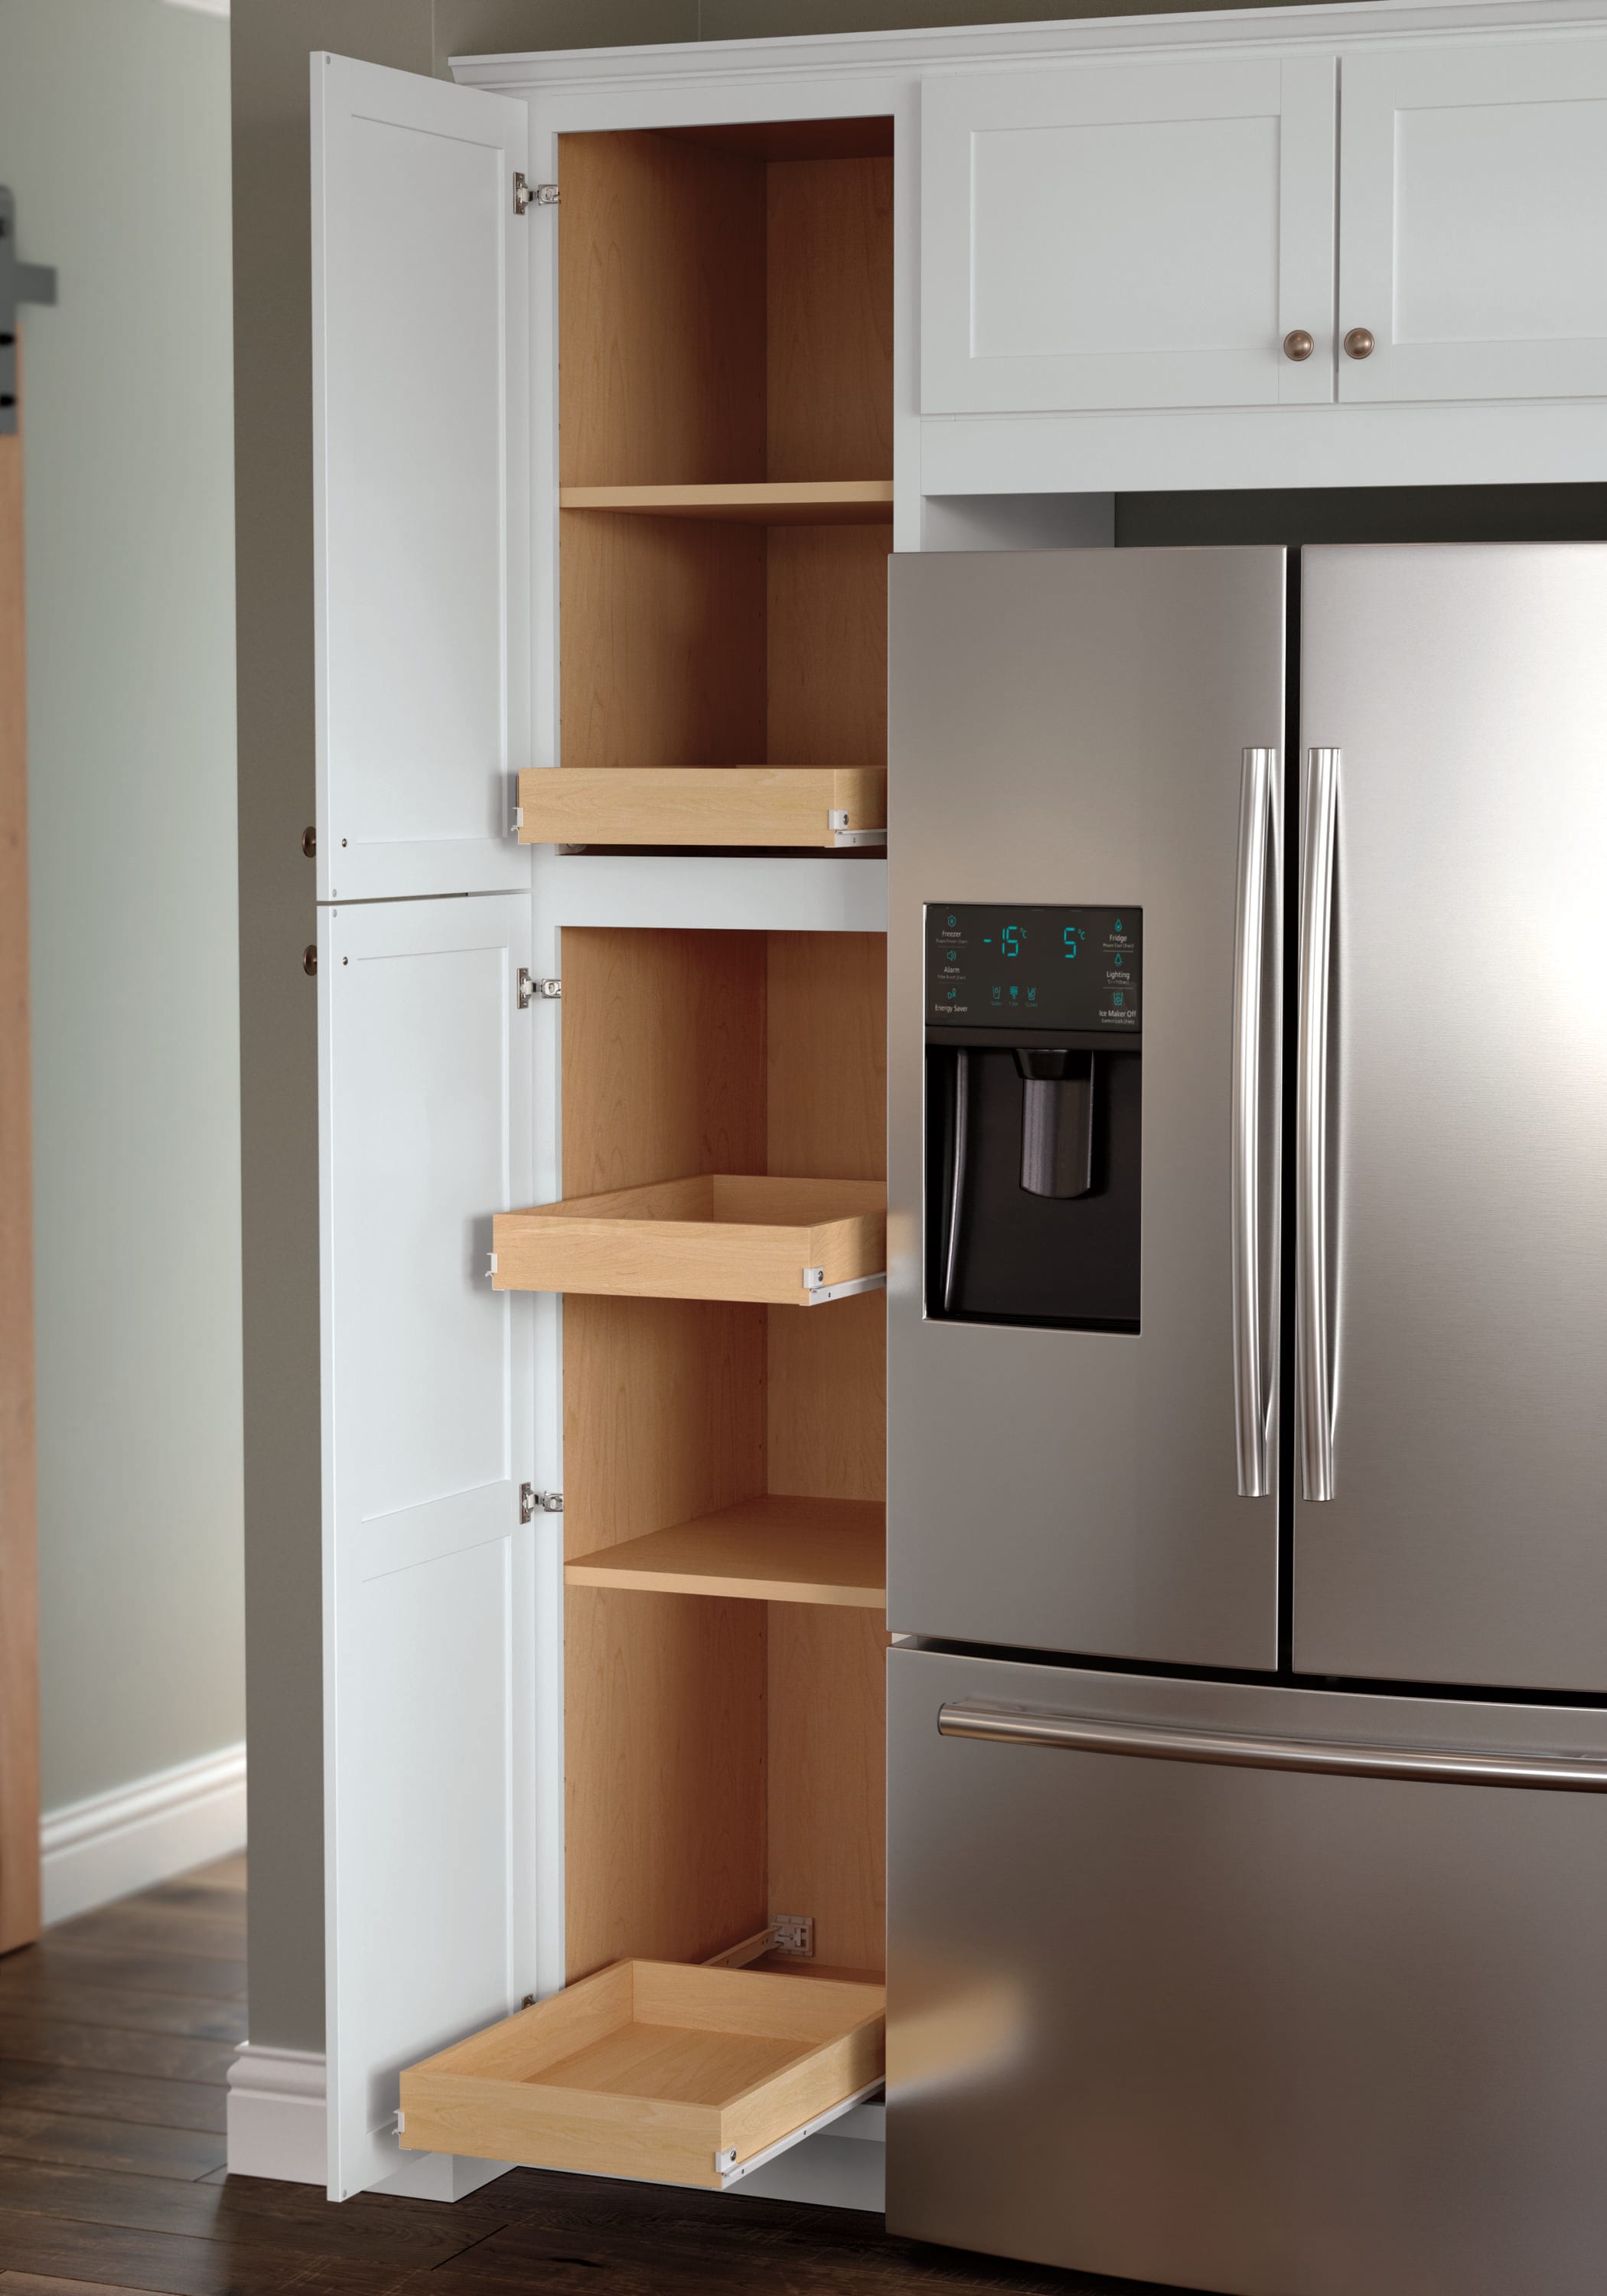 Diamond at Lowes - Organization - Utensil Pantry Pull Out Cabinet